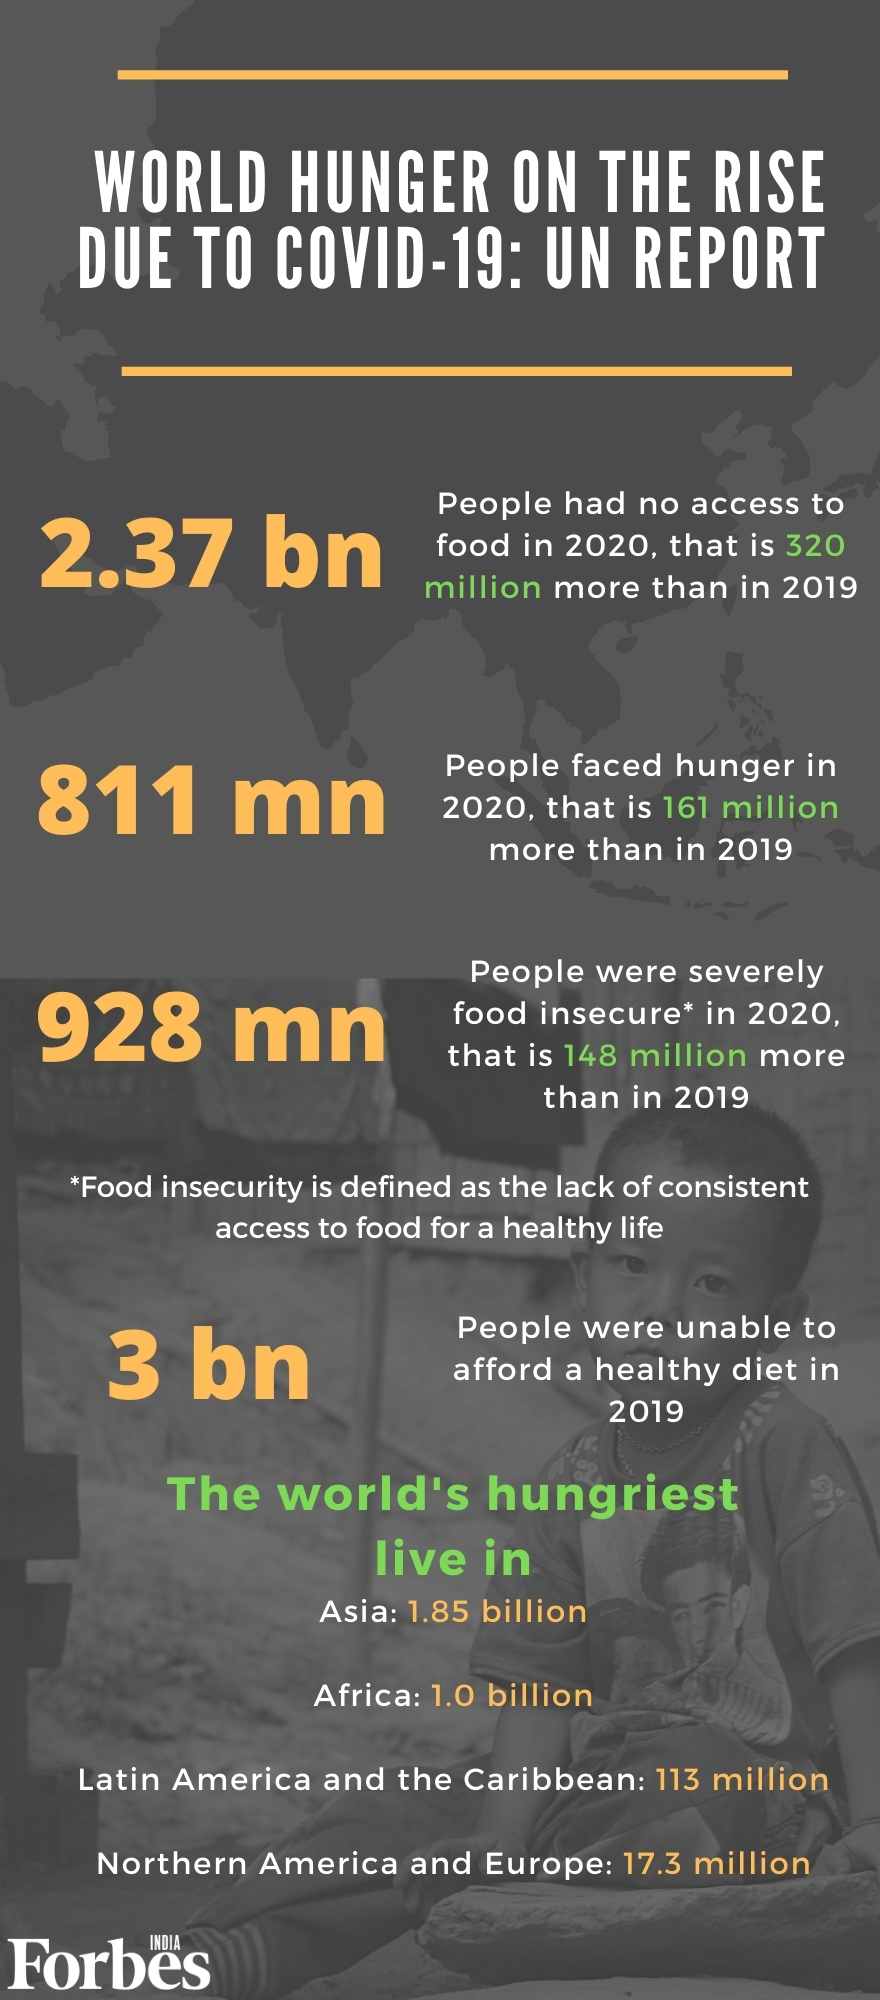 2.37 billion people had no access to food in 2020 Covid-19 pandemic year: UN report